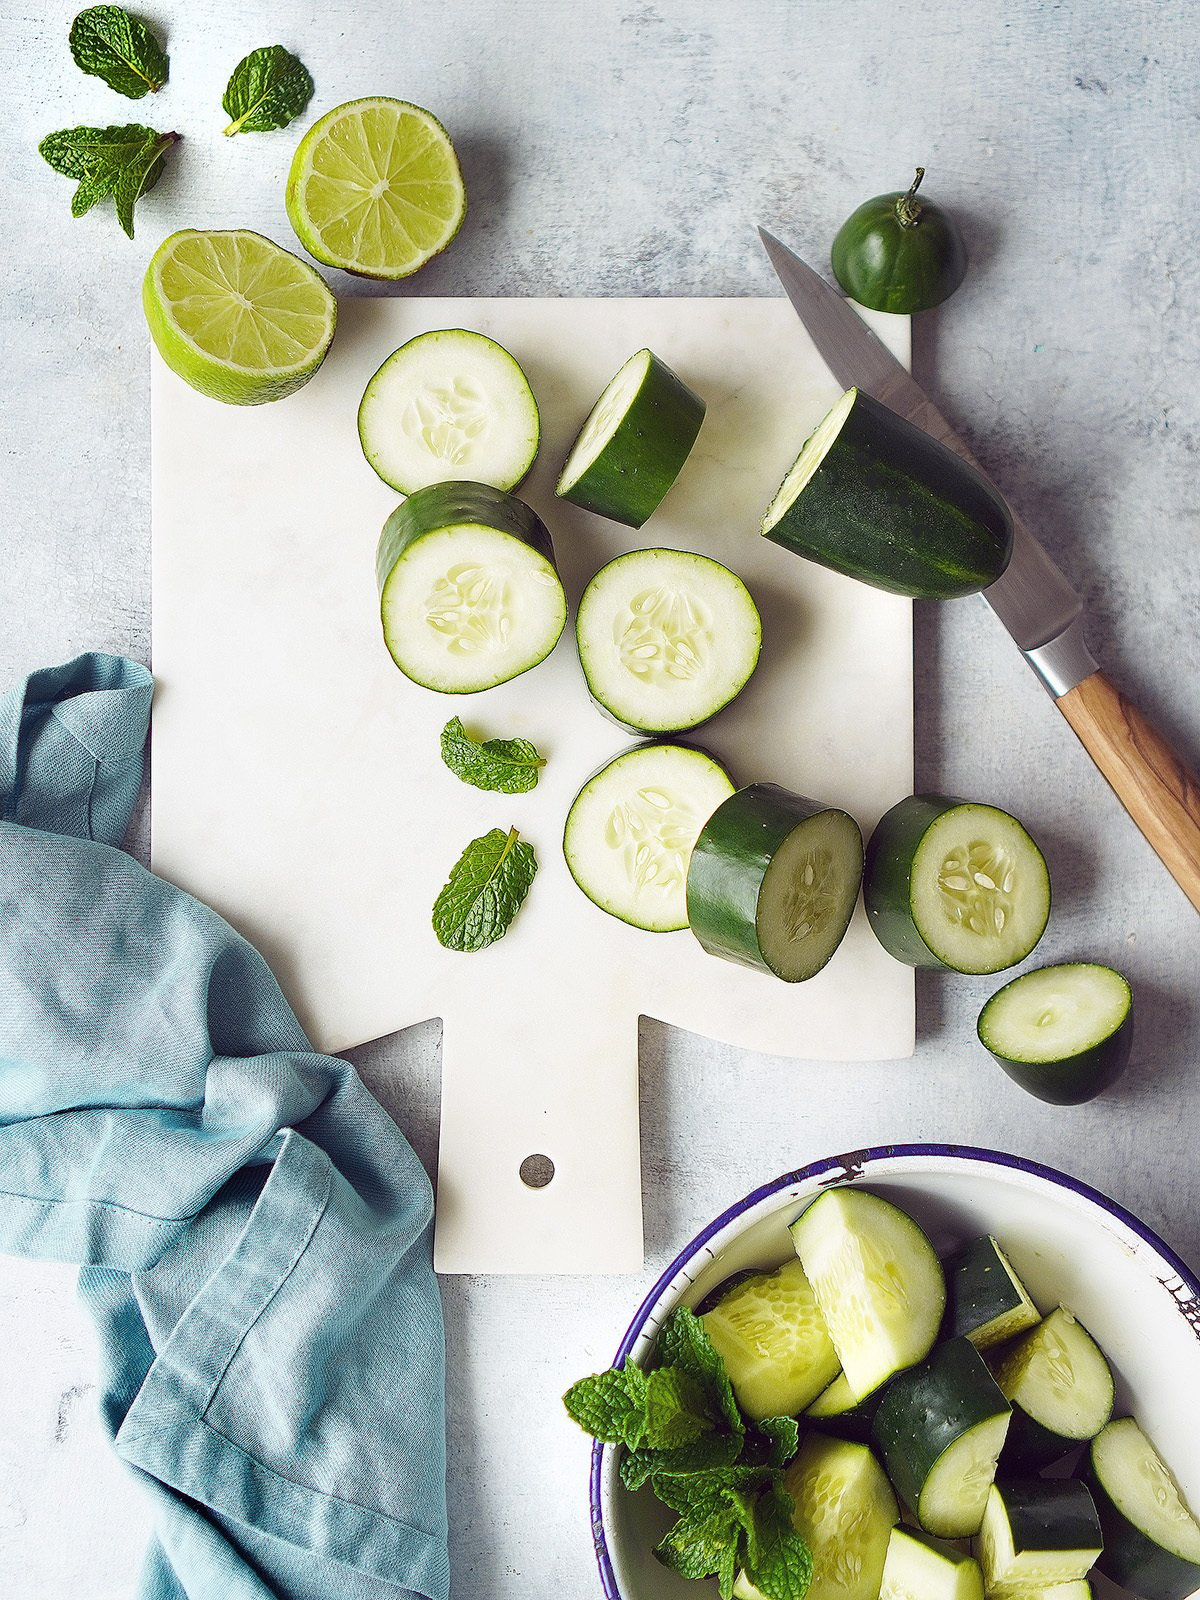 Ingredients for Cucumber Agua Fresca: cucumbers limes and sugar